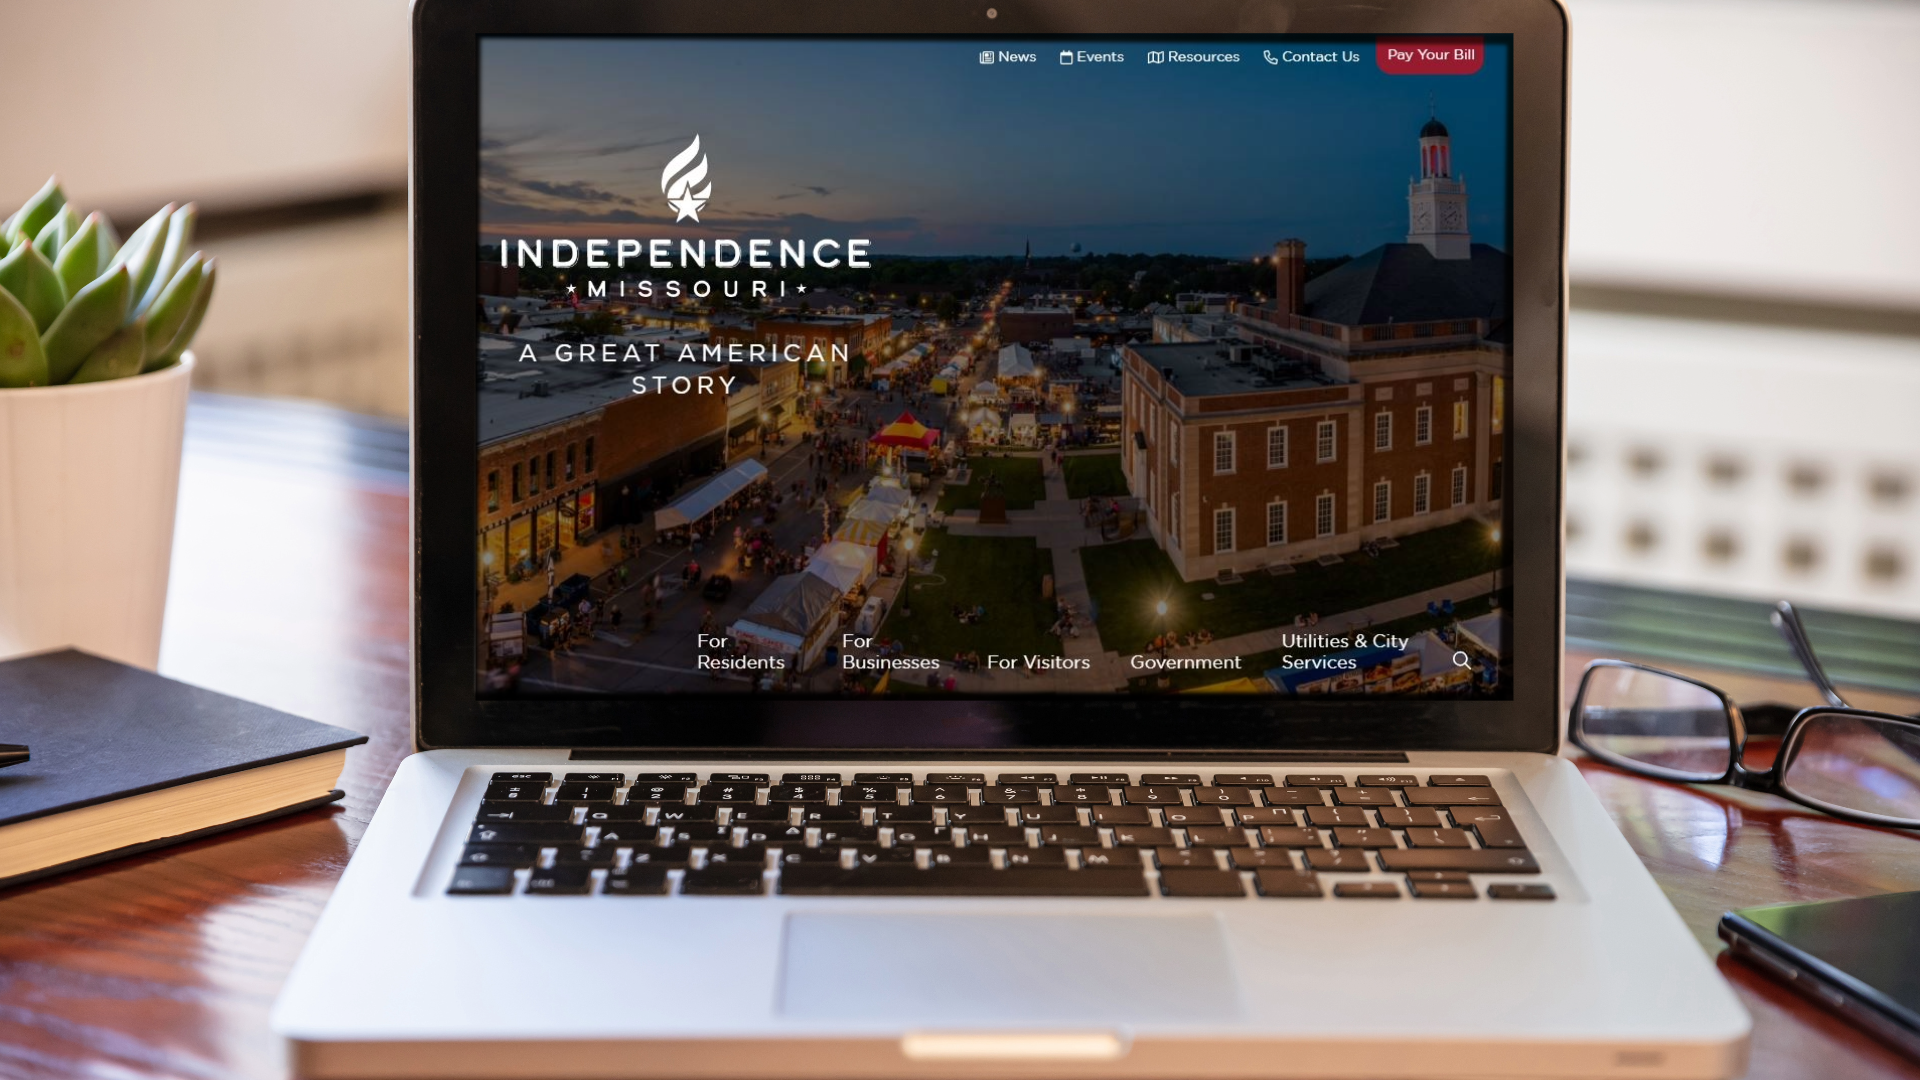 A silver laptop sits on a desk with a plant, a book, a phone, and glasses beside it. The screen shows the new City of Independence website. 